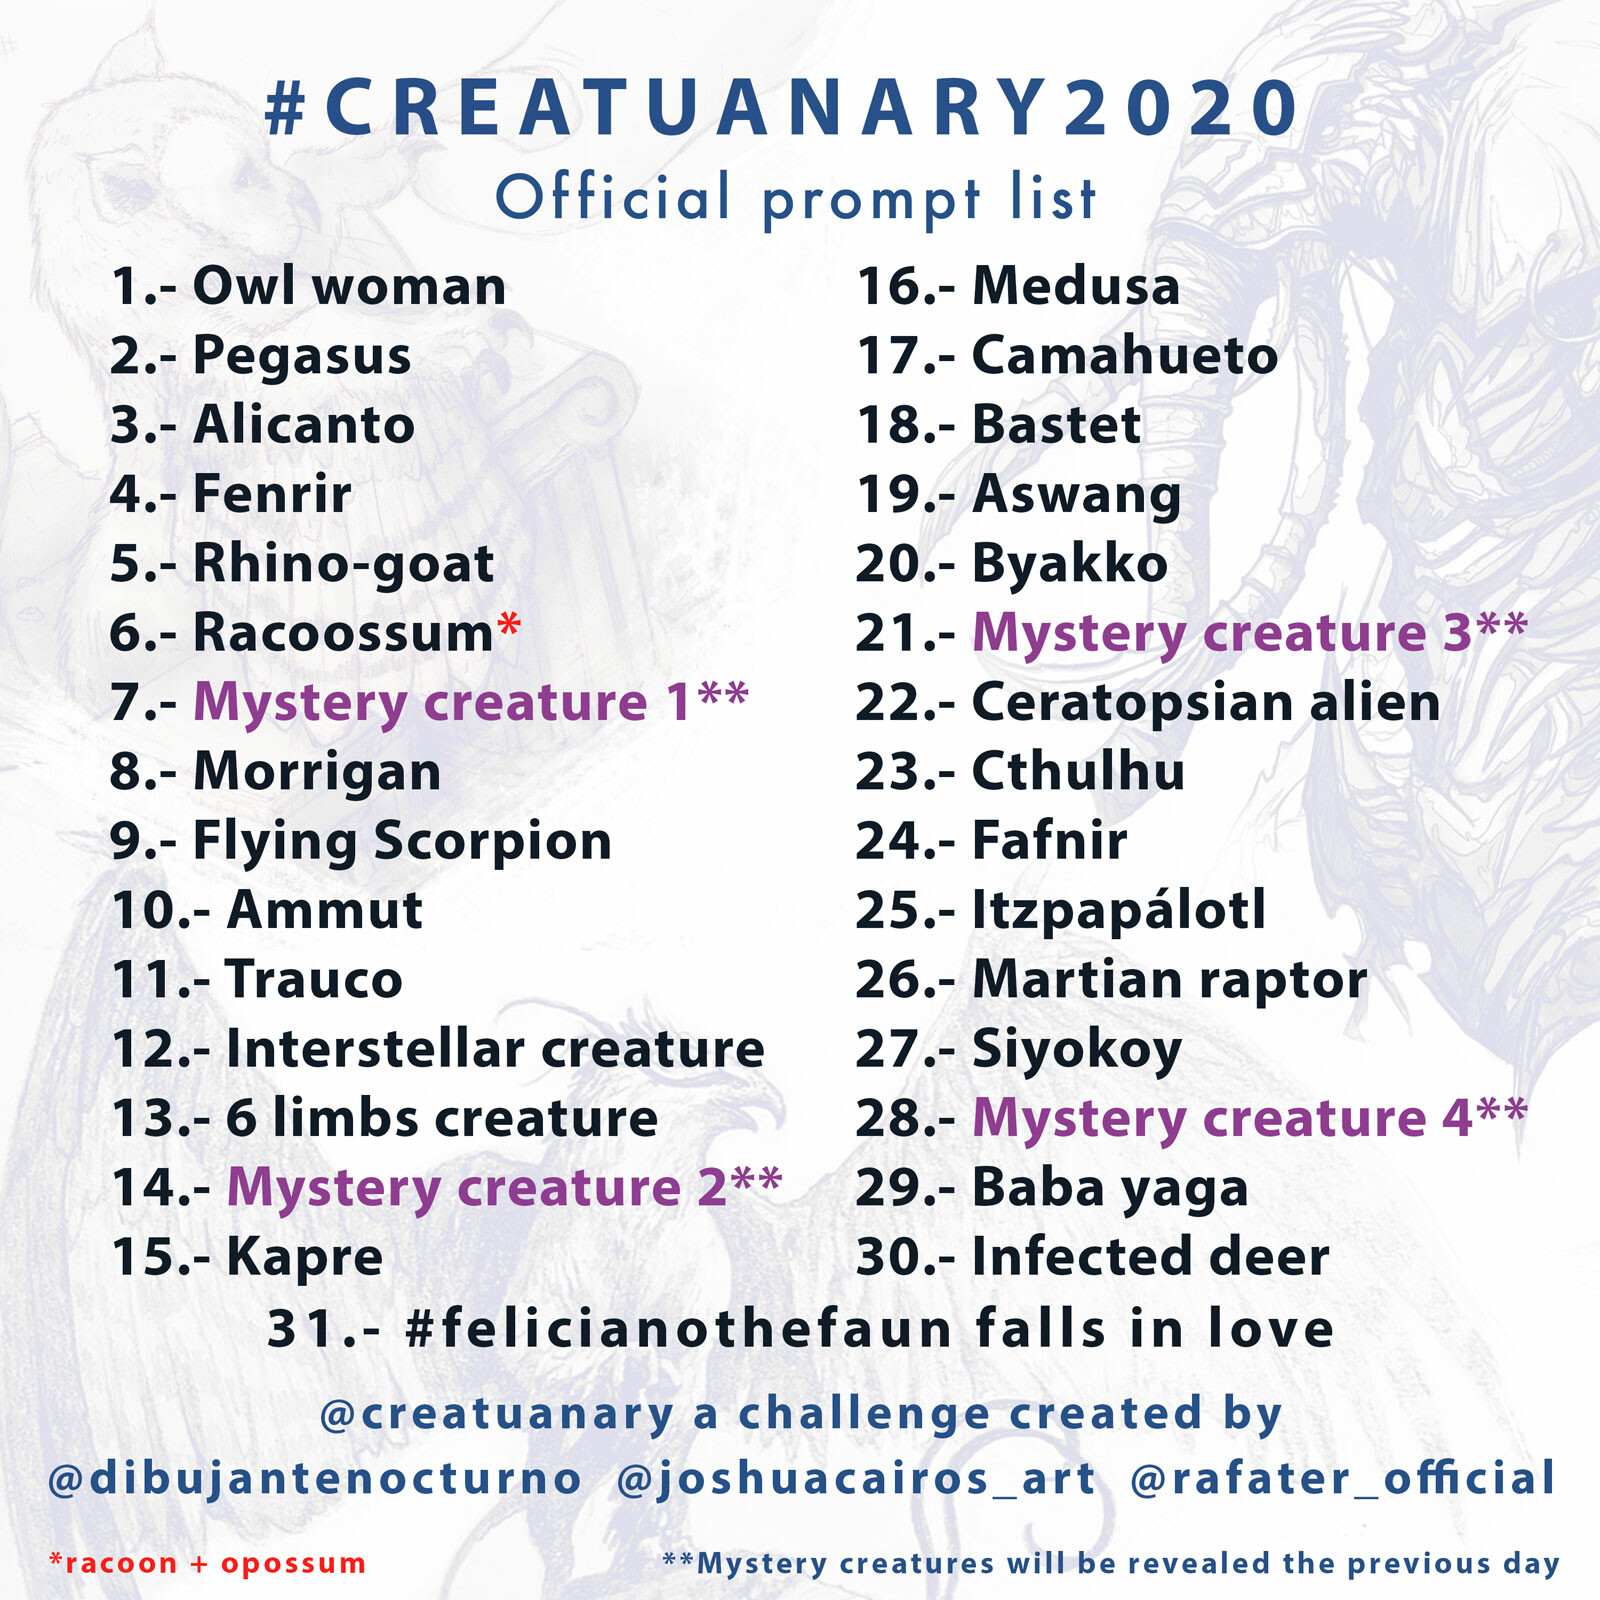 Creatuanary 2020 - Official prompt list